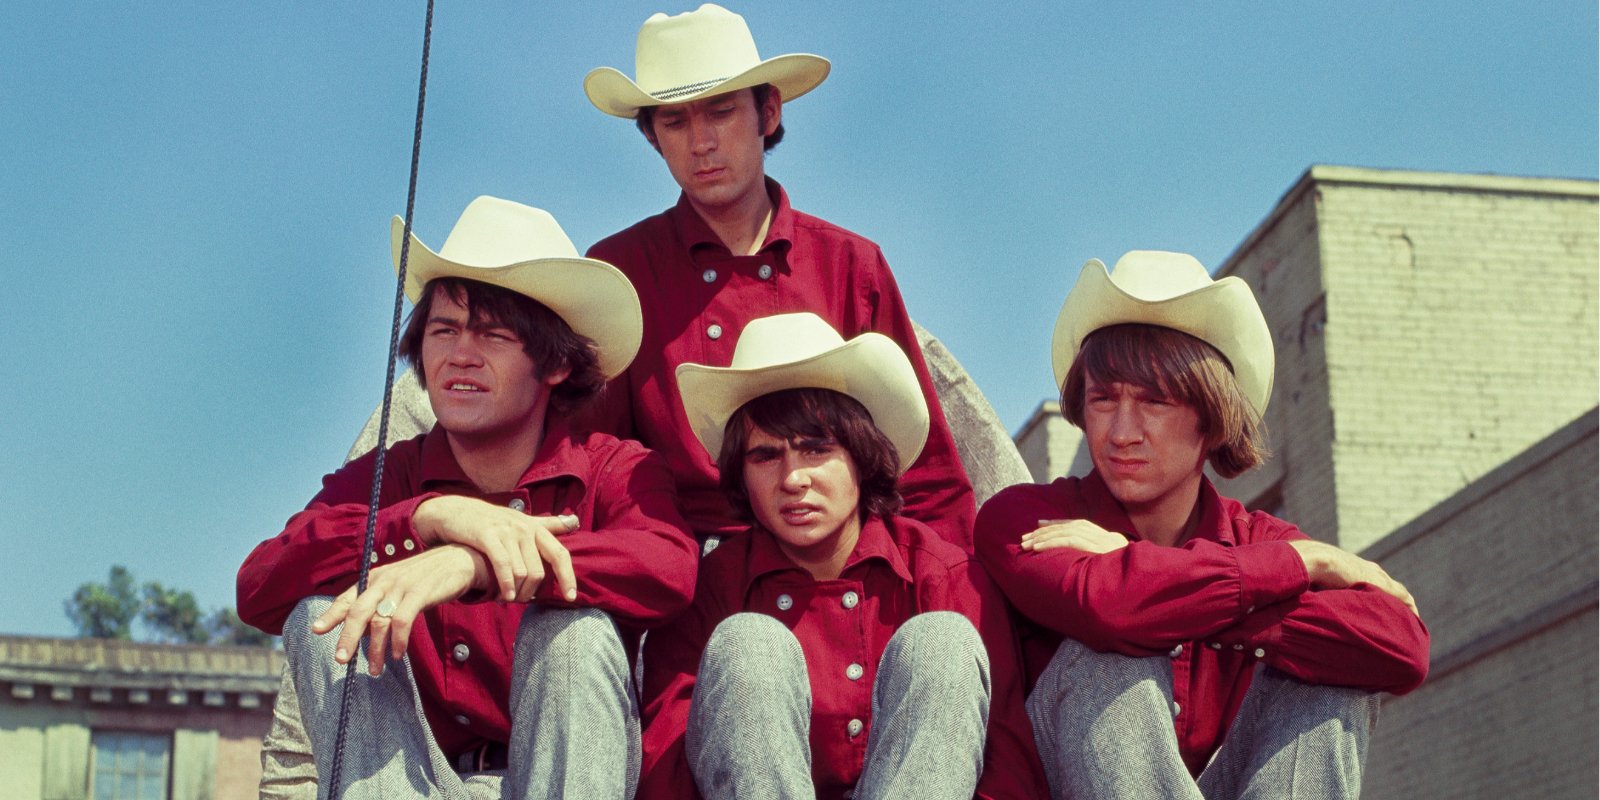 Mike Nesmith Admits The Monkees Were Initially ‘Disastrous’ and ‘Couldn’t Work Together’ as a Musical Group